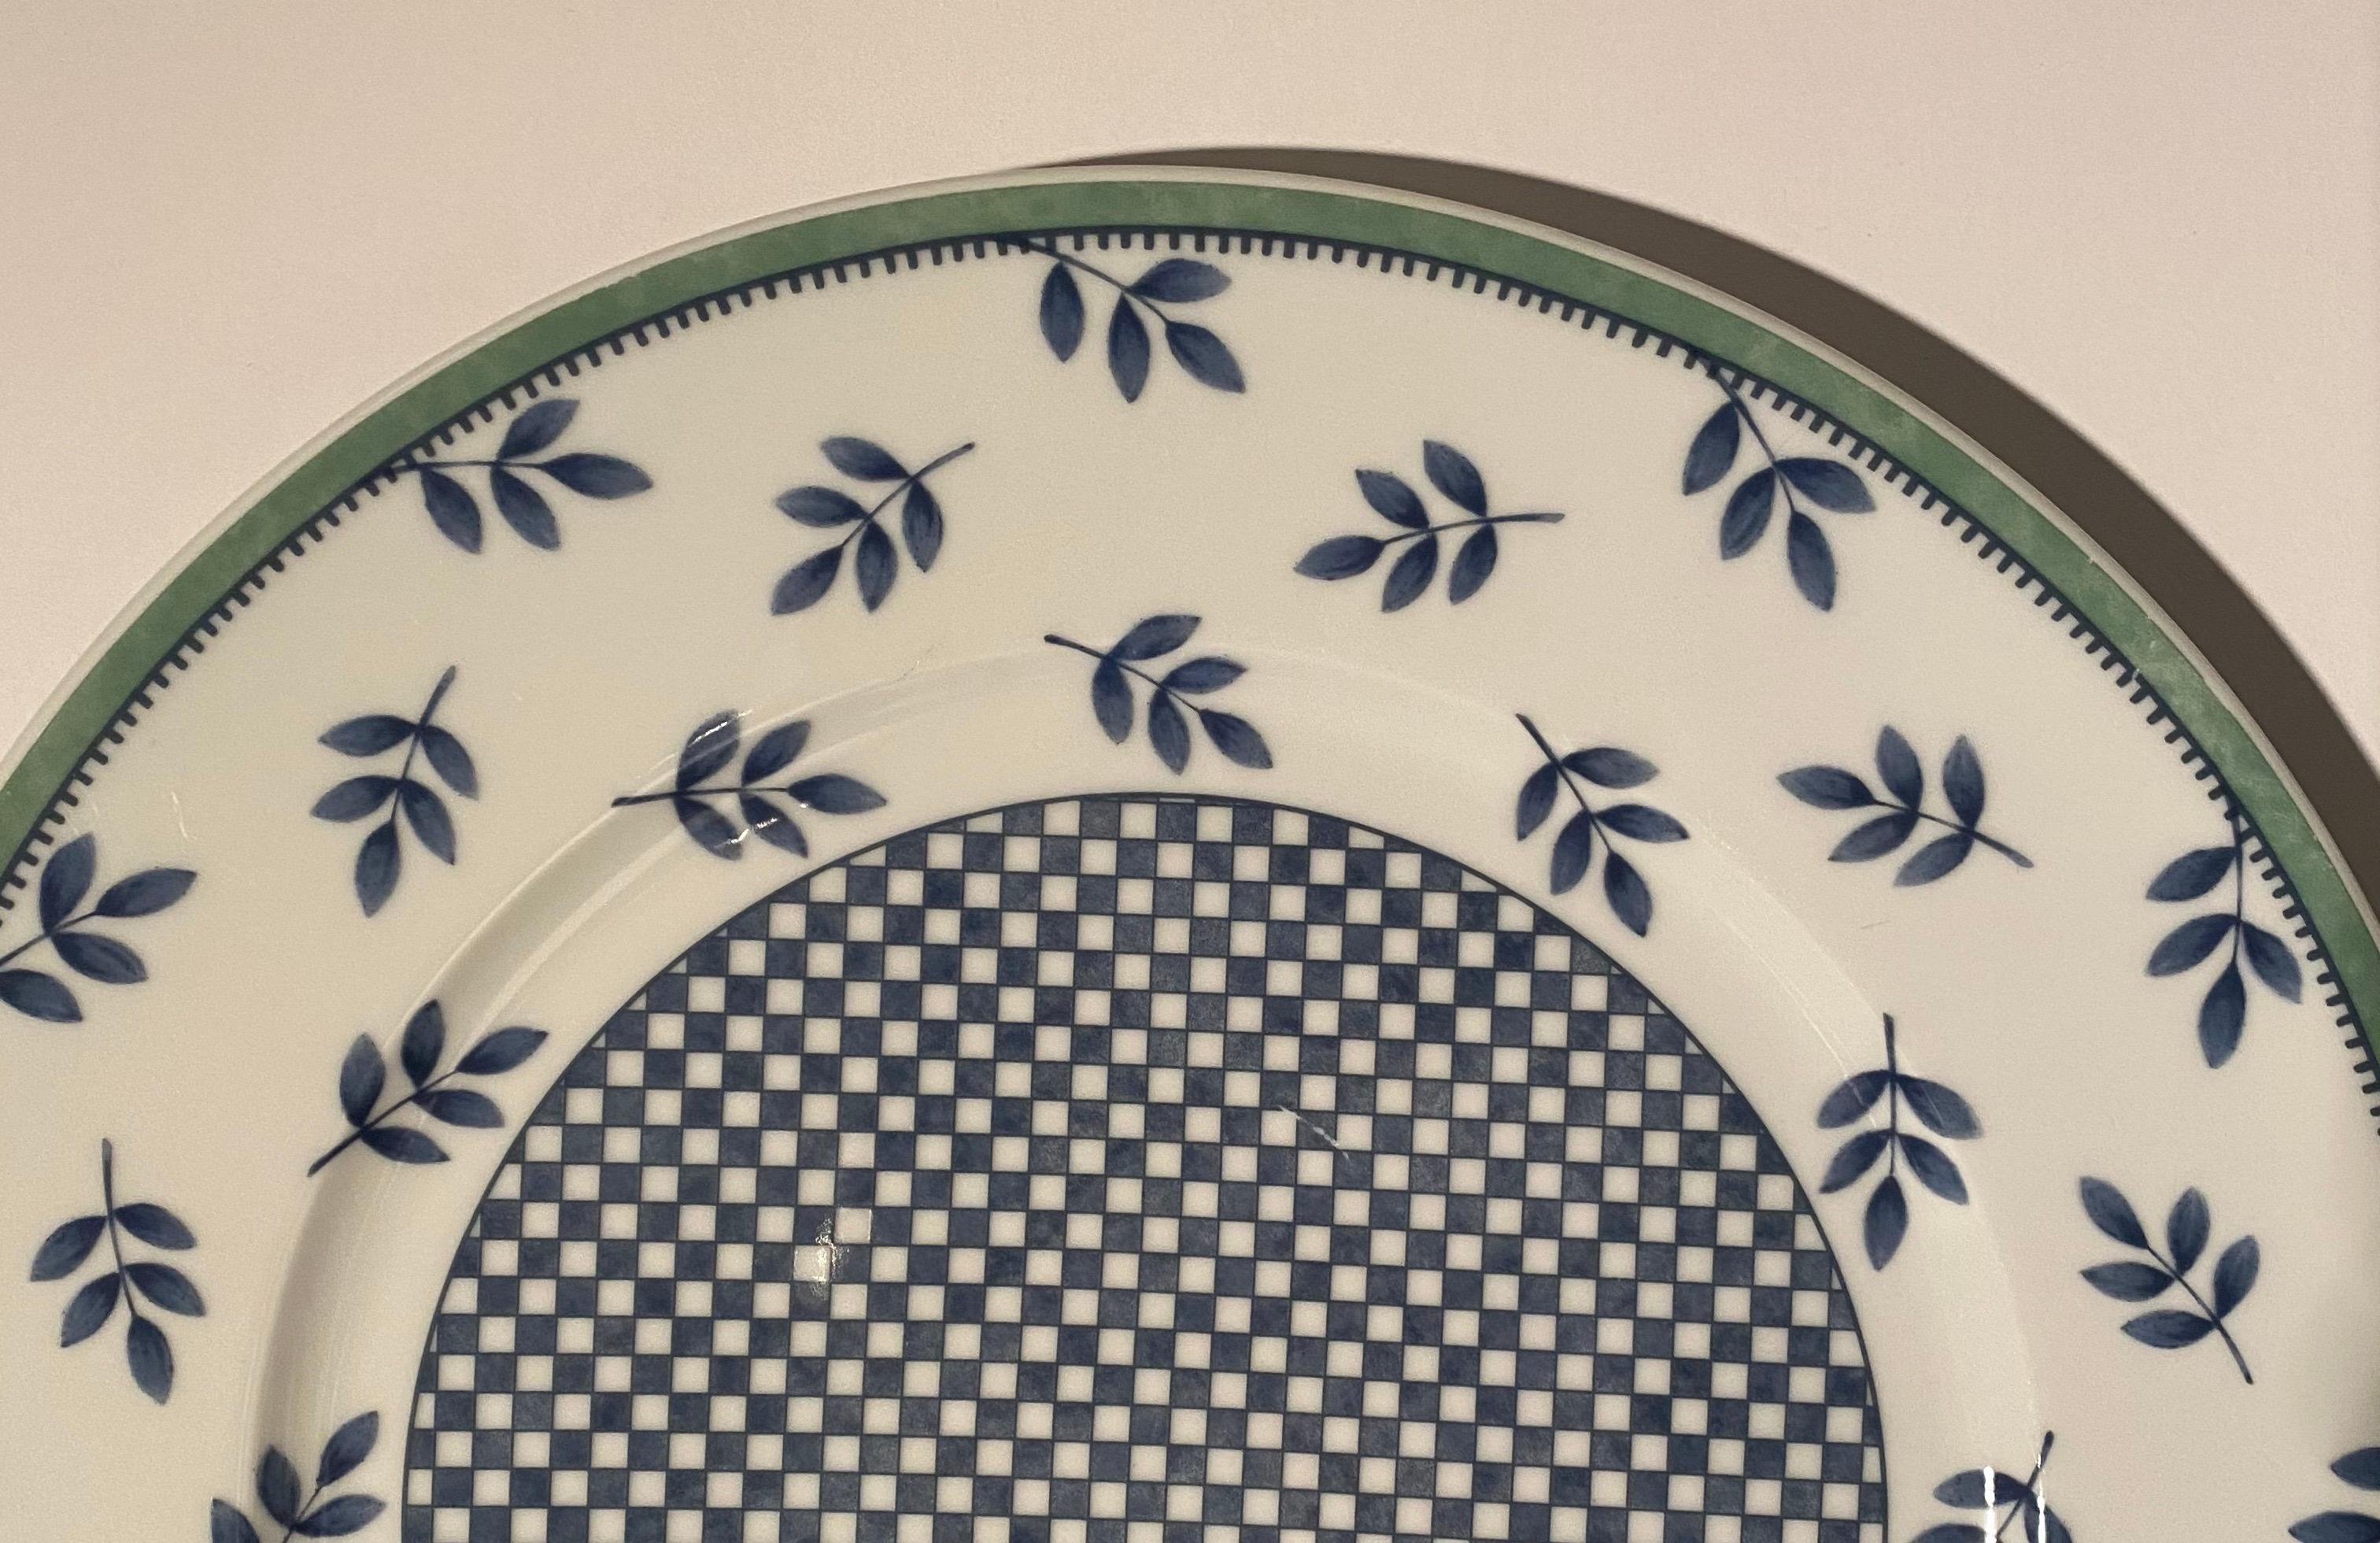 A Villeroy & Boch chop plate or round serving dish in the Switch 3 Castell pattern.

Signed /marked on back. 

Item details:
Measures: Width 12 5/8 inches
Microwave safe, dishwasher safe
Checkerboard, leaf pattern
Discontinued pattern.